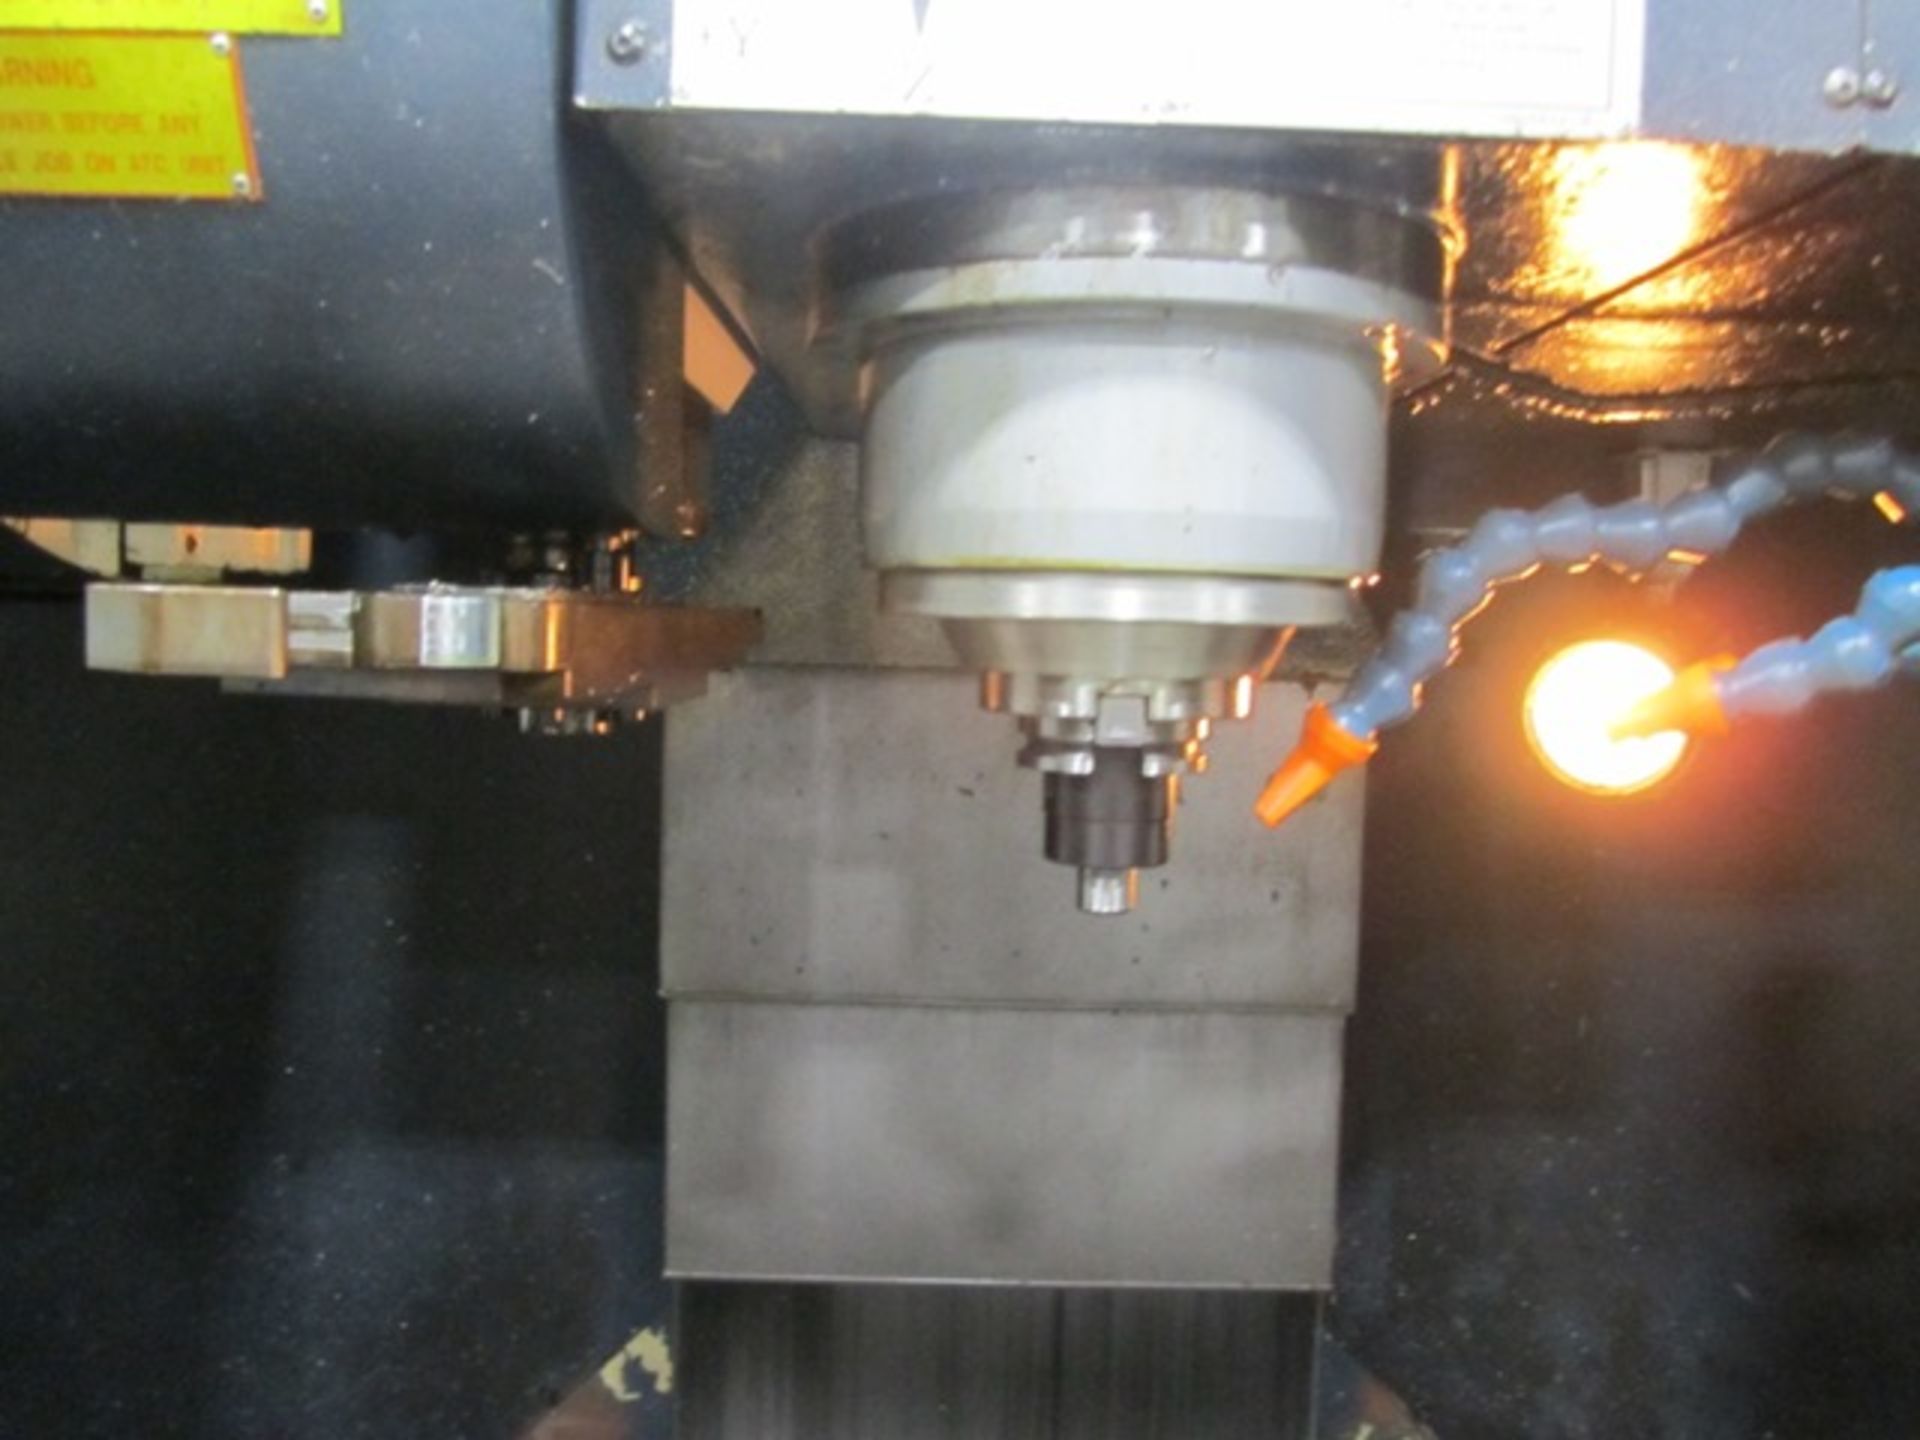 Johnford Model SV-48 Super 4-Axis CNC Vertical Machining Center with 10" Tsudakoma 4th Axis Rotary - Image 6 of 11